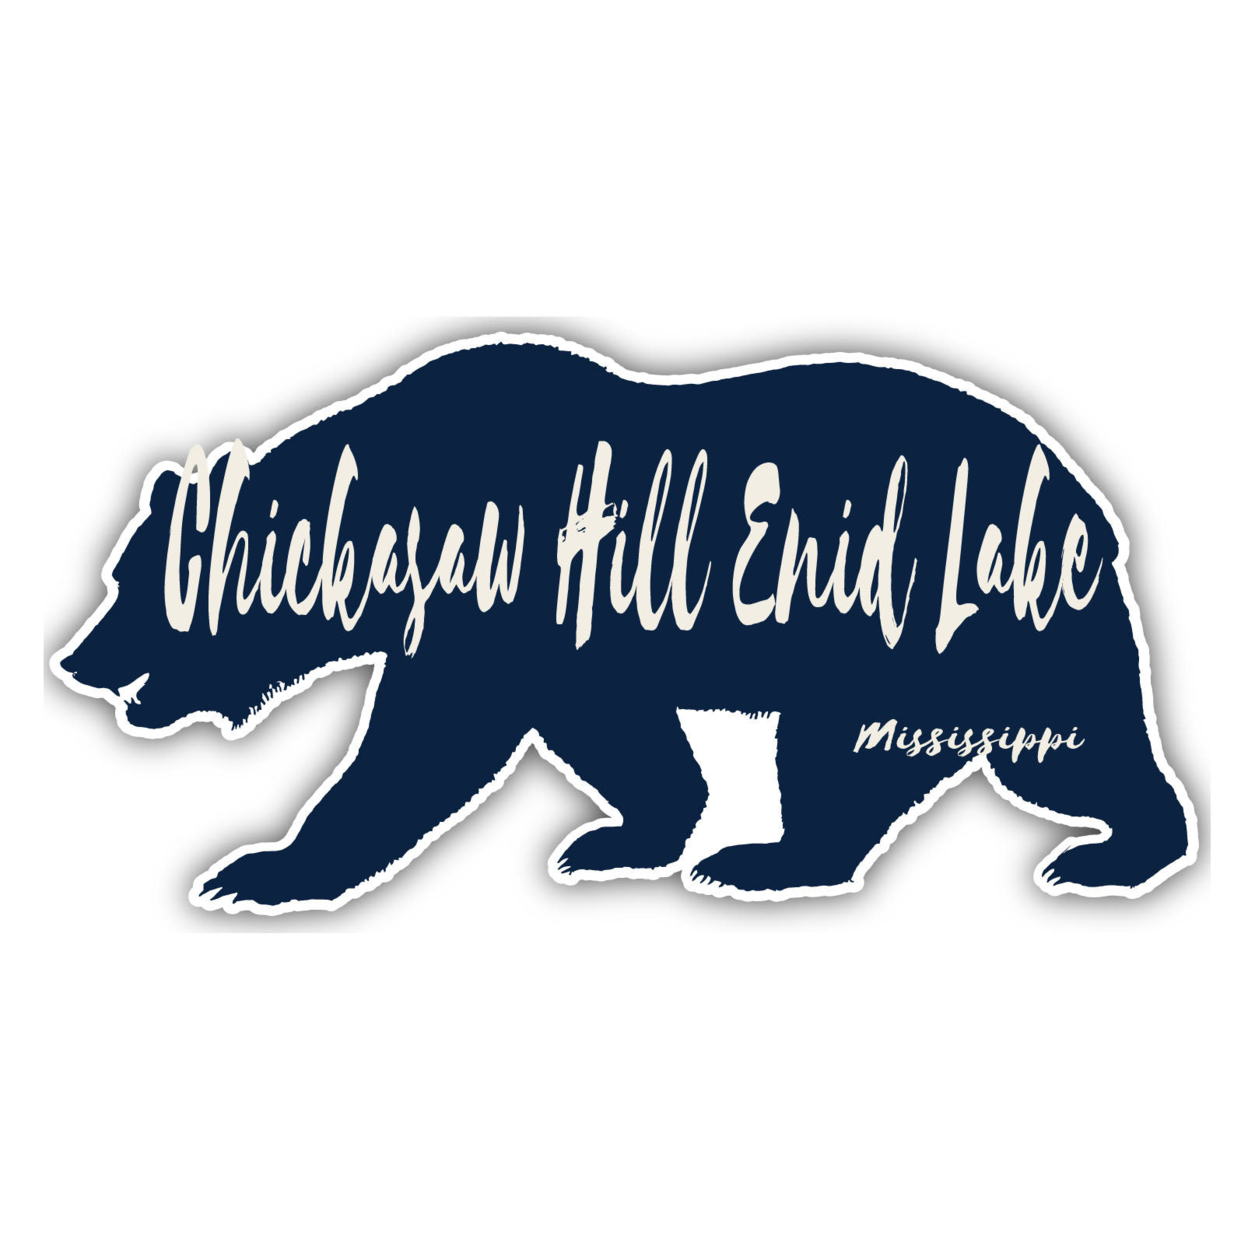 Chickasaw Hill Enid Lake Mississippi Souvenir Decorative Stickers (Choose Theme And Size) - Single Unit, 4-Inch, Bear